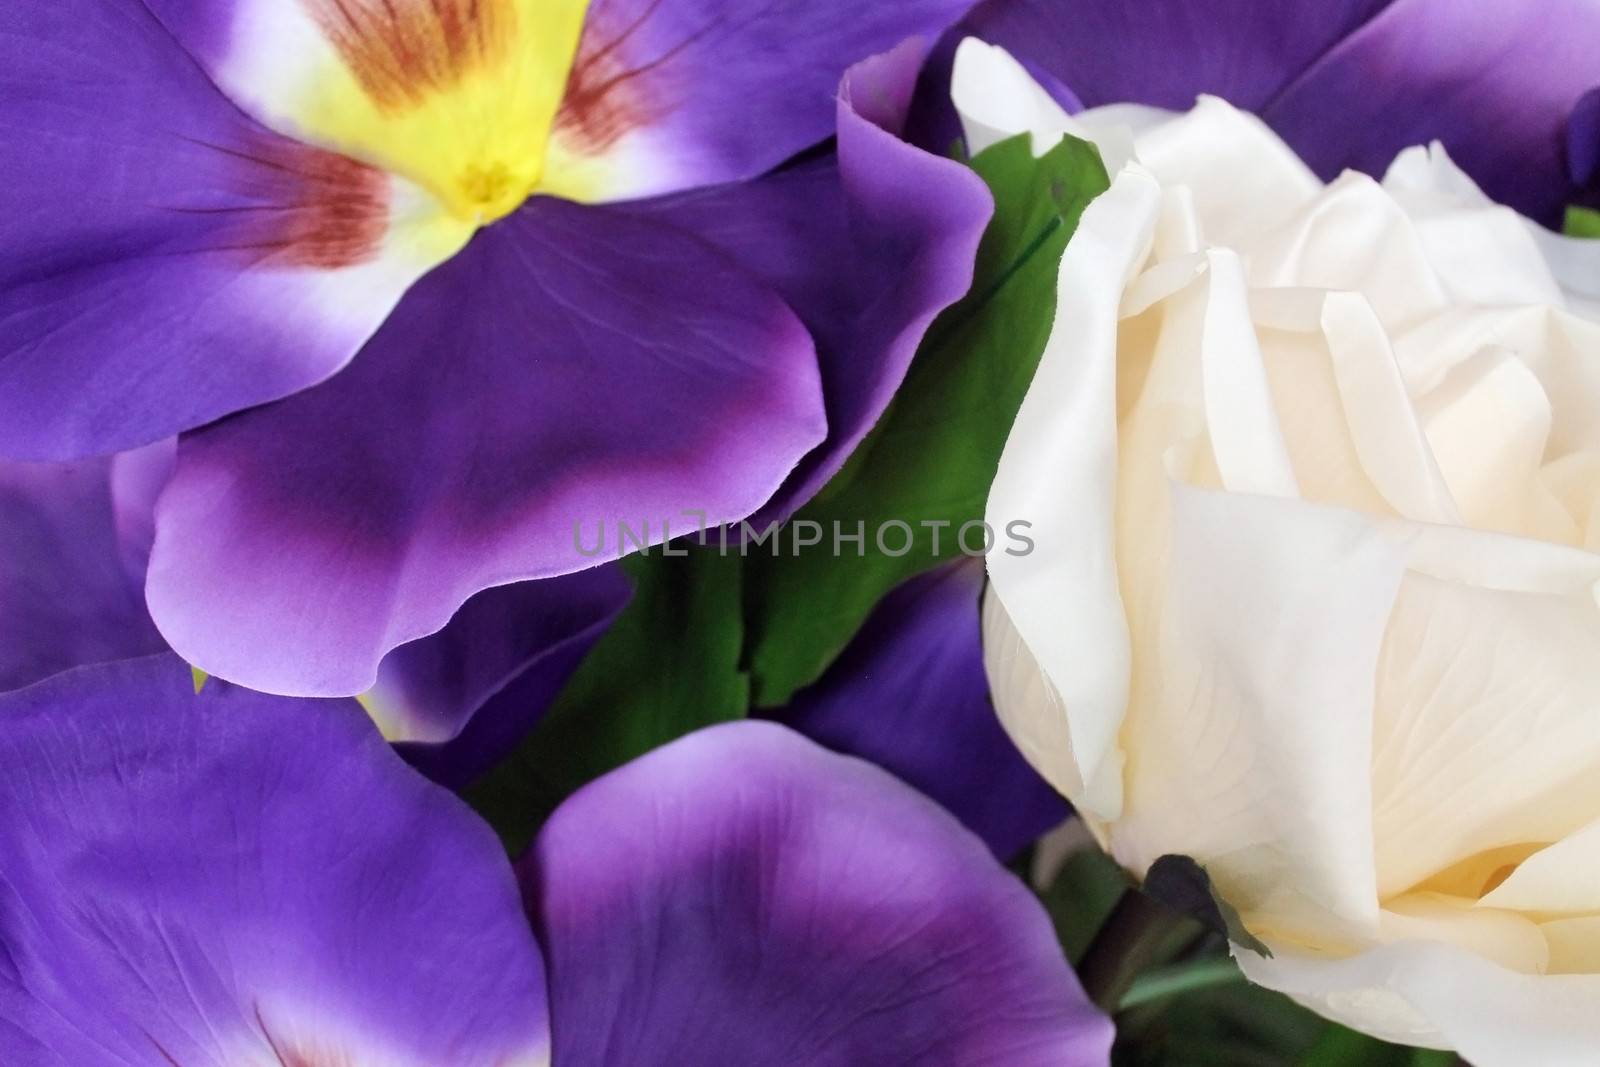 pansy and rose background